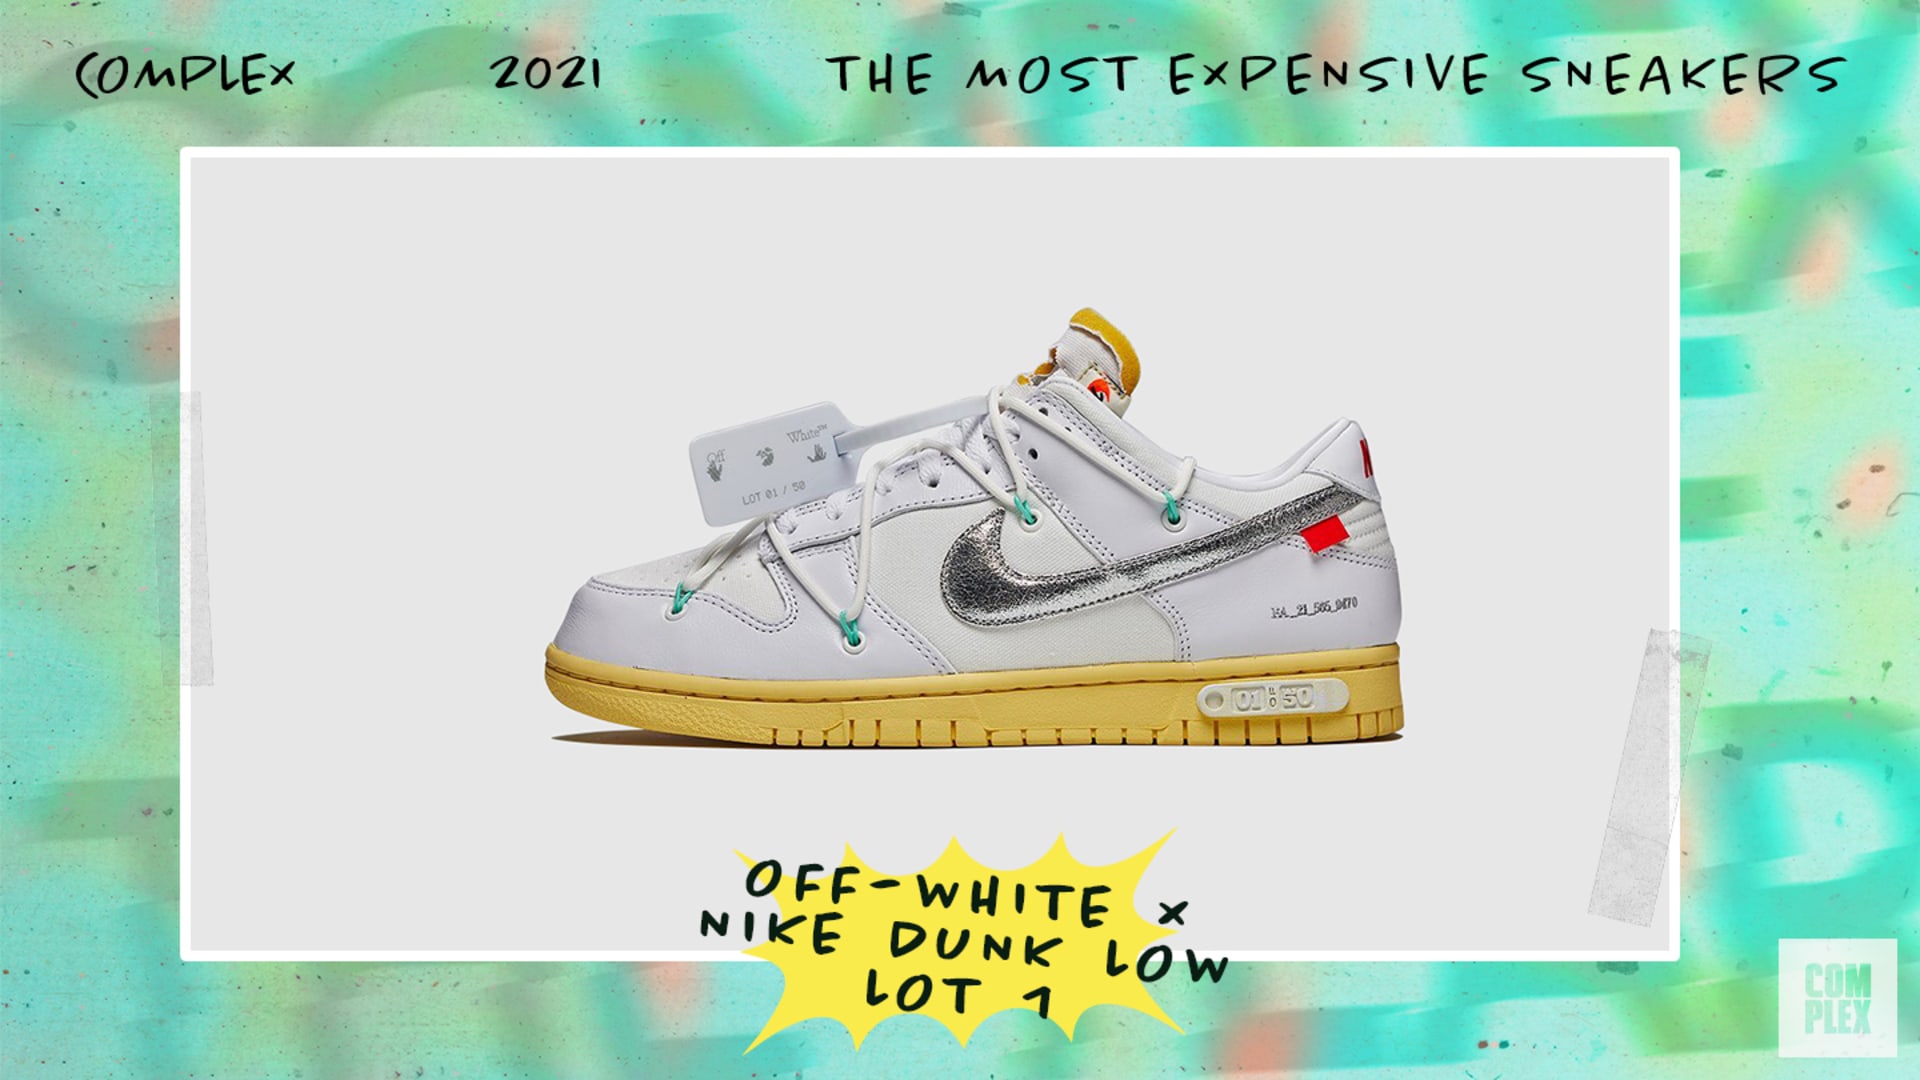 Off White x Nike Dunk Low Lot 1